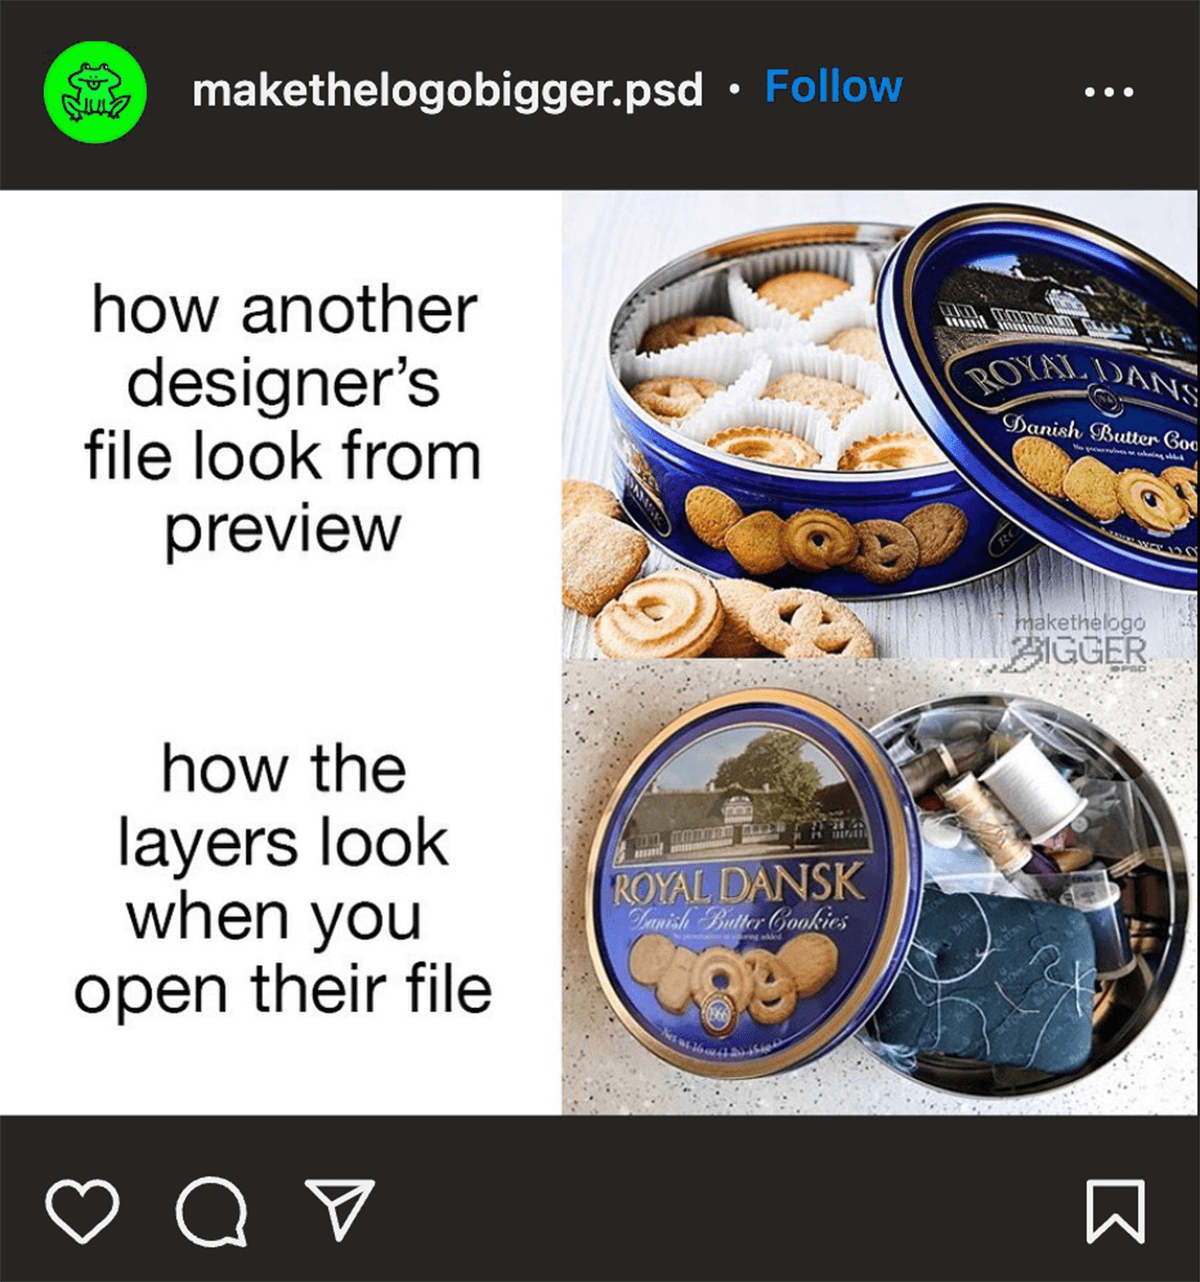 makethelogobigger.psd on instagram - how another designer's file look from preview vs how the layers look when you open their file